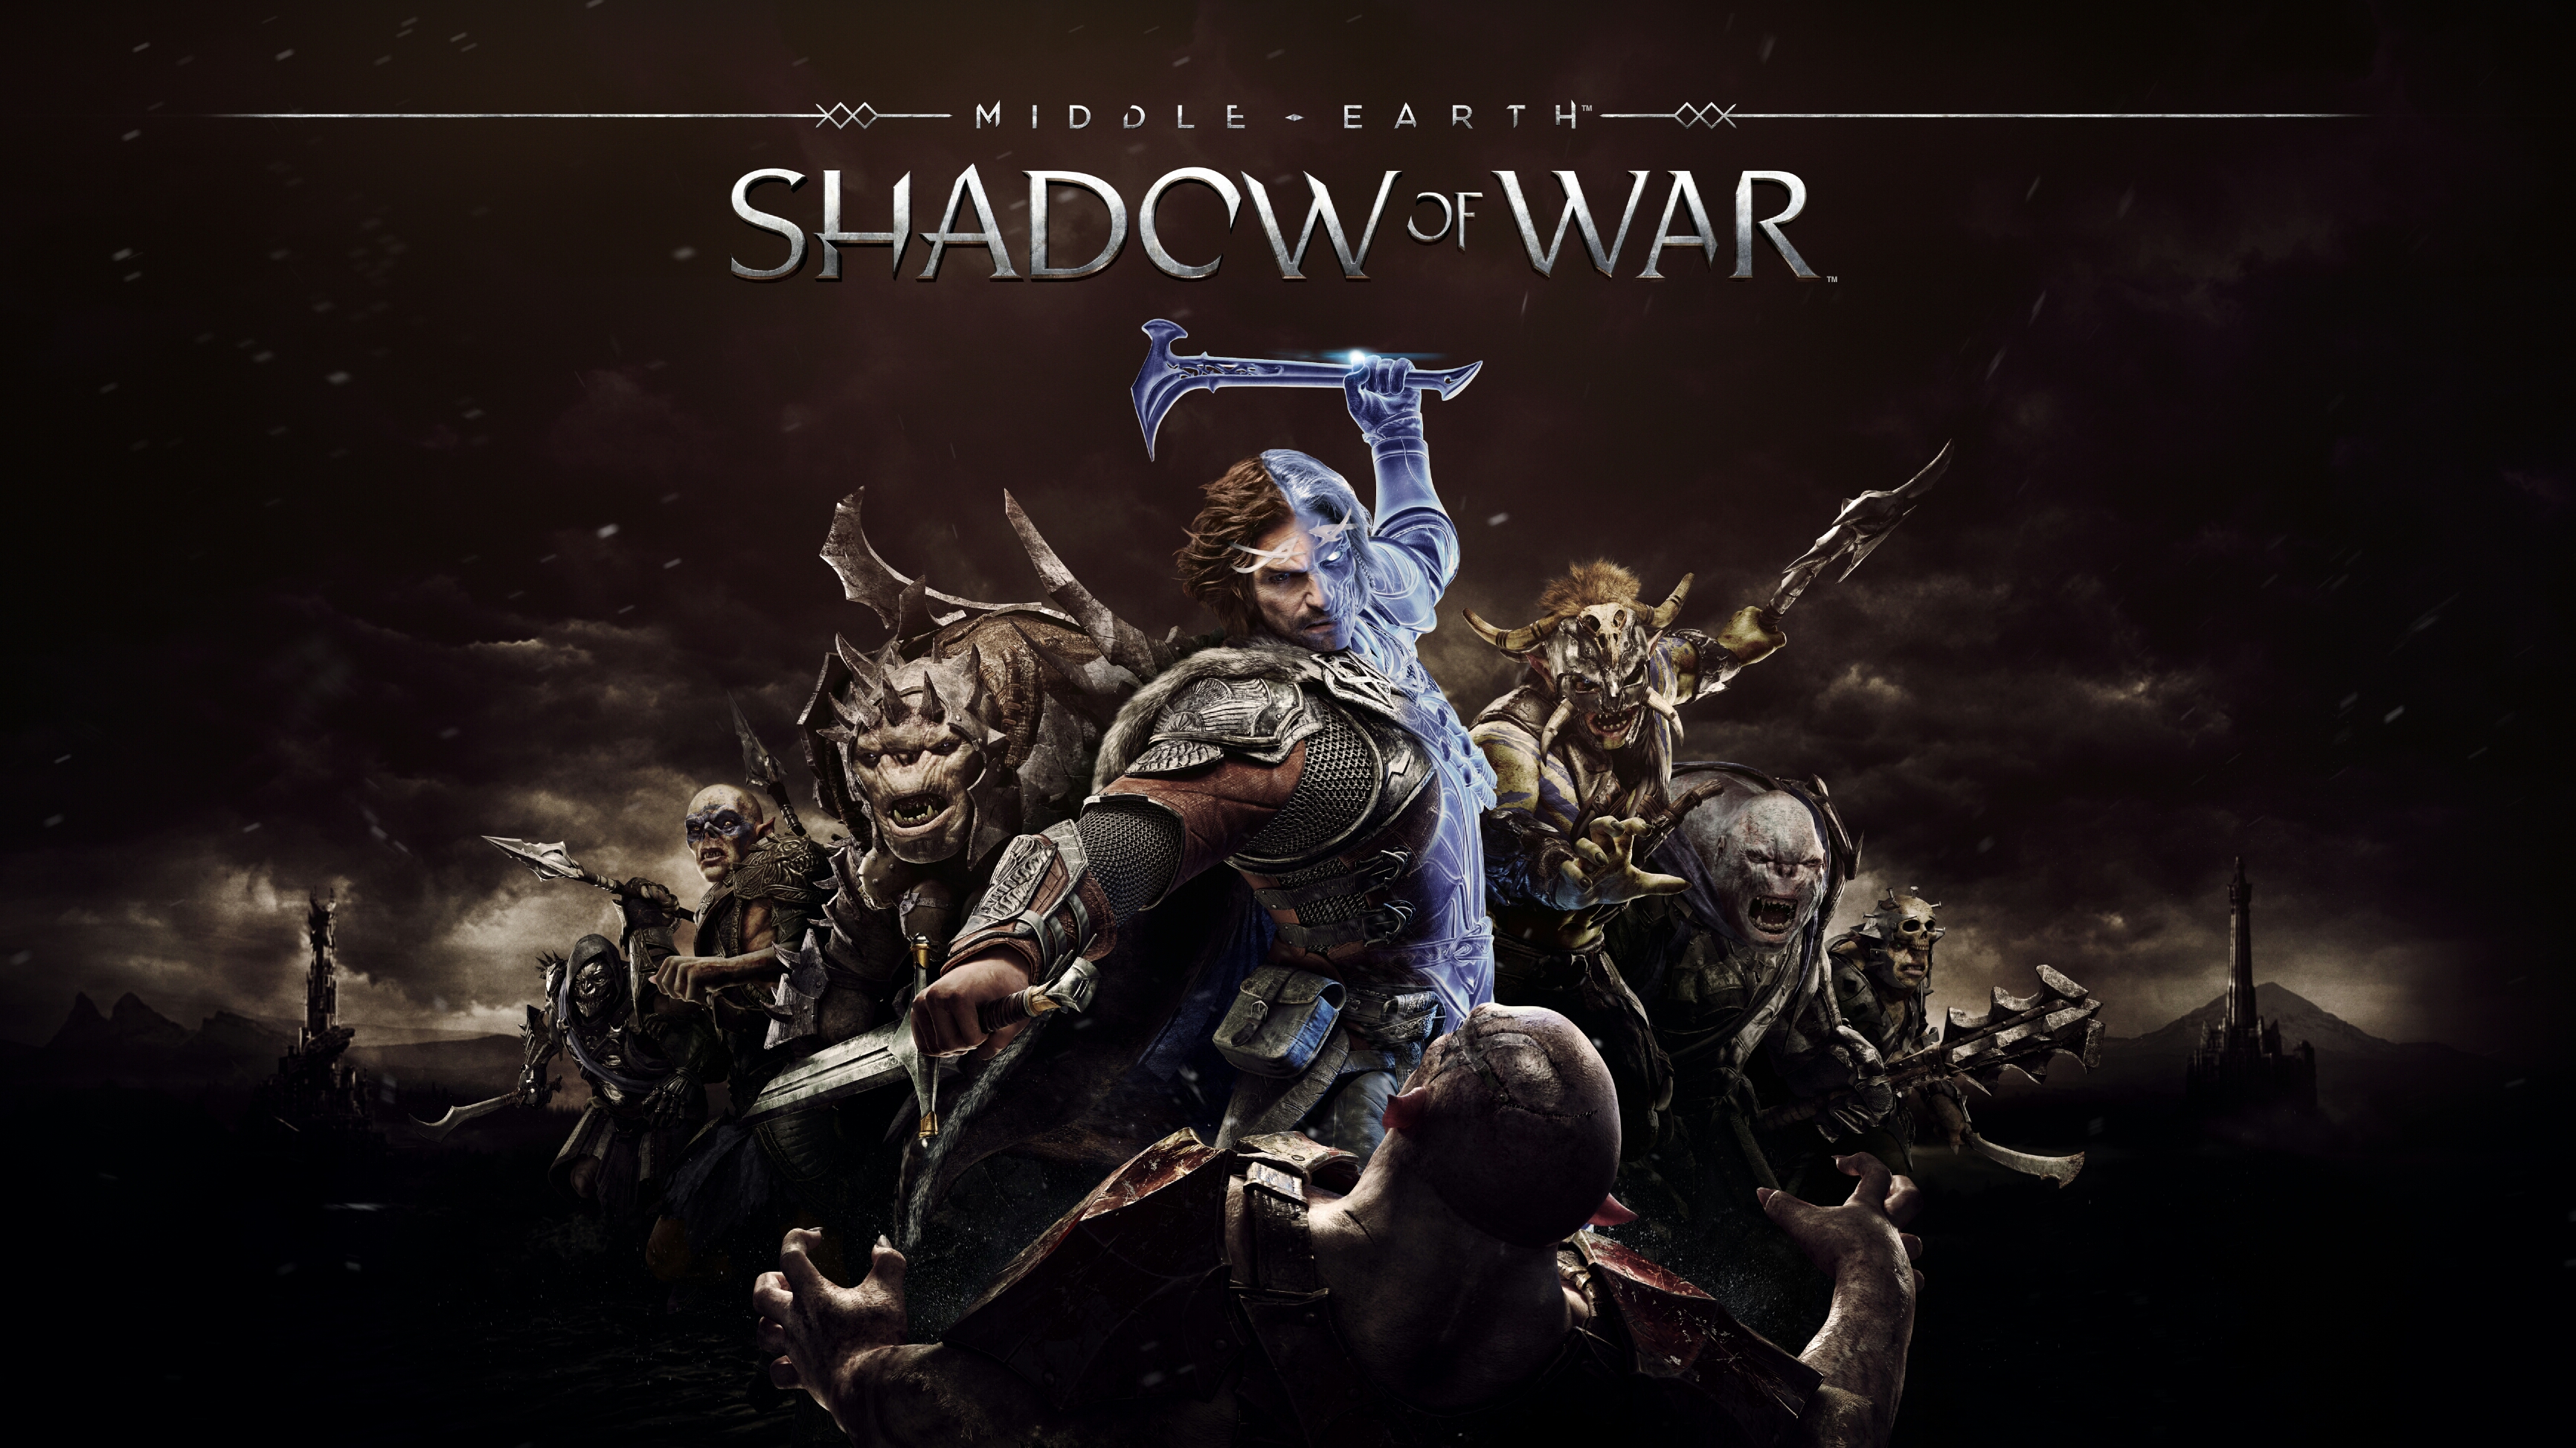 Middle-Earth: Shadow of War Announced